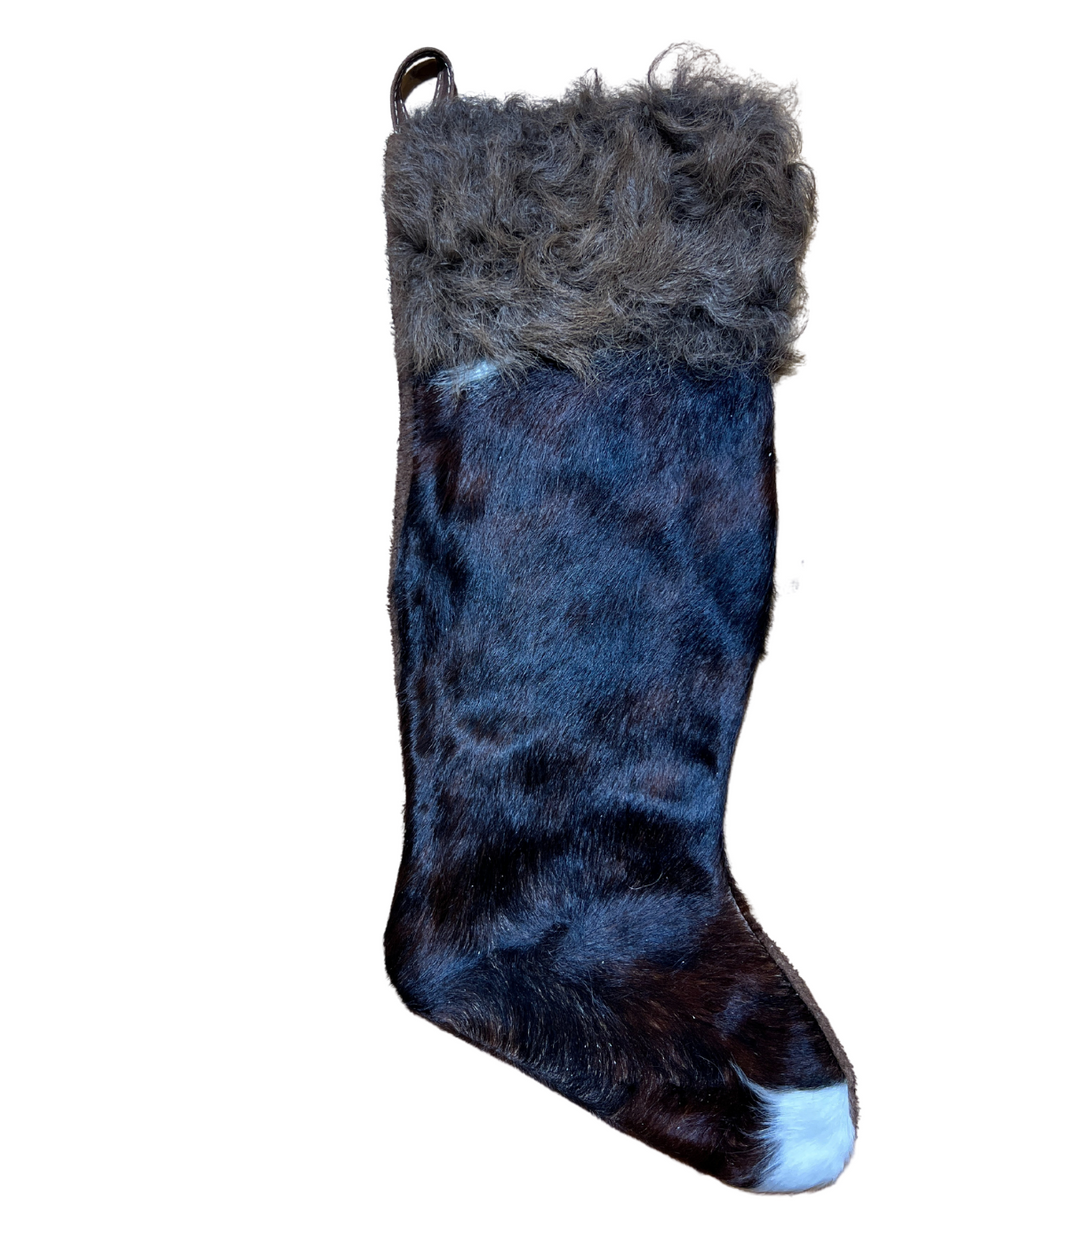 Cowhide Christmas Stocking - Black with Bison Hair - Large